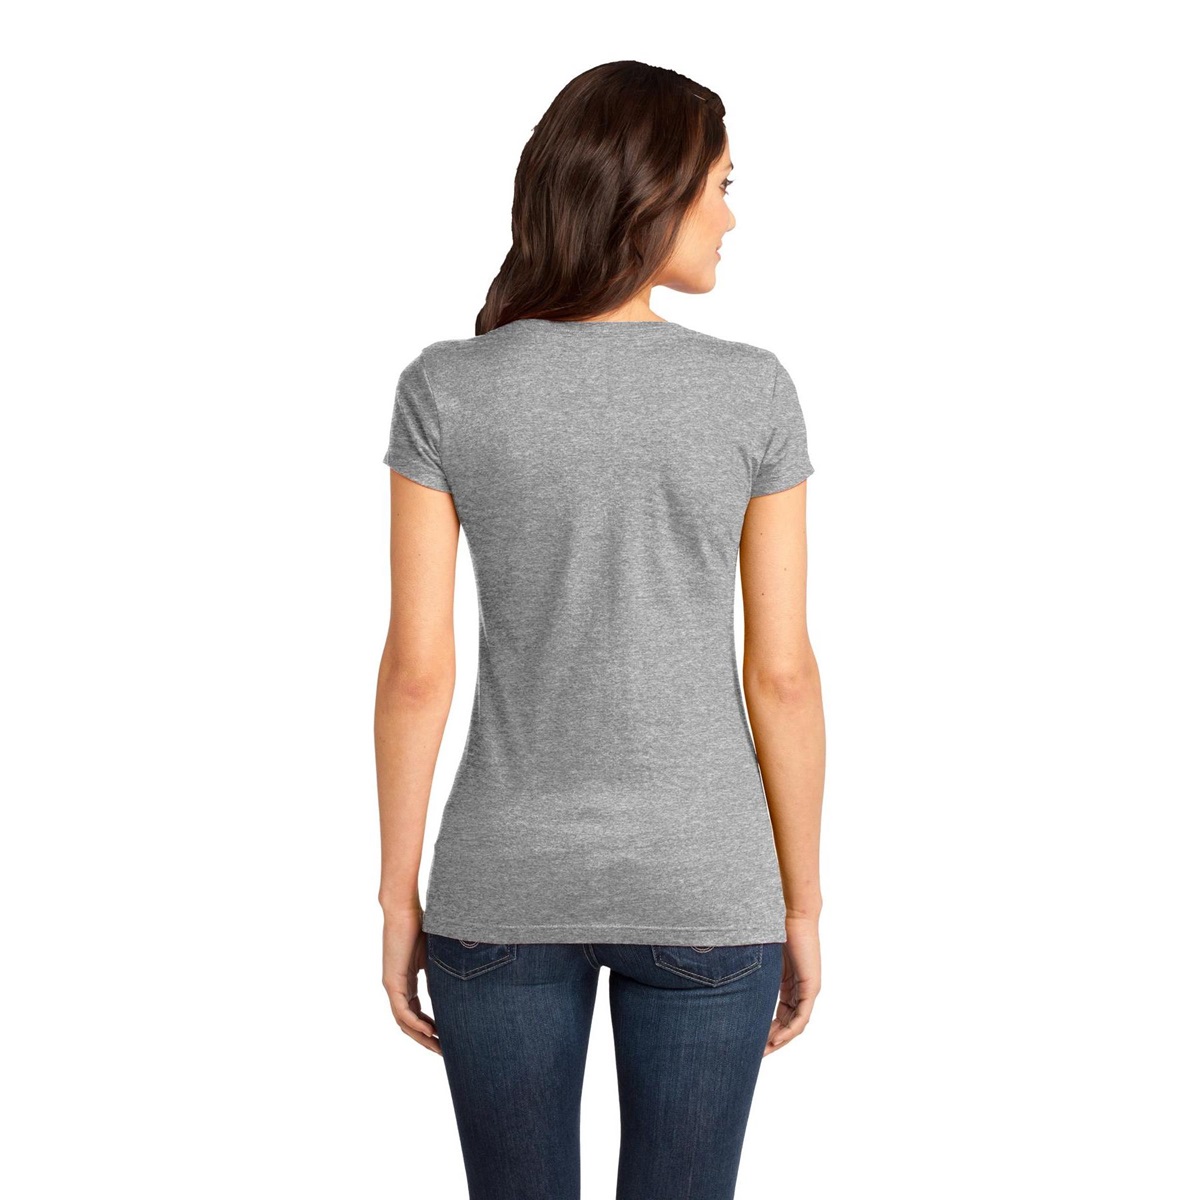 District DT6501 Juniors Very Important Tee V-Neck - Light Heather Grey ...